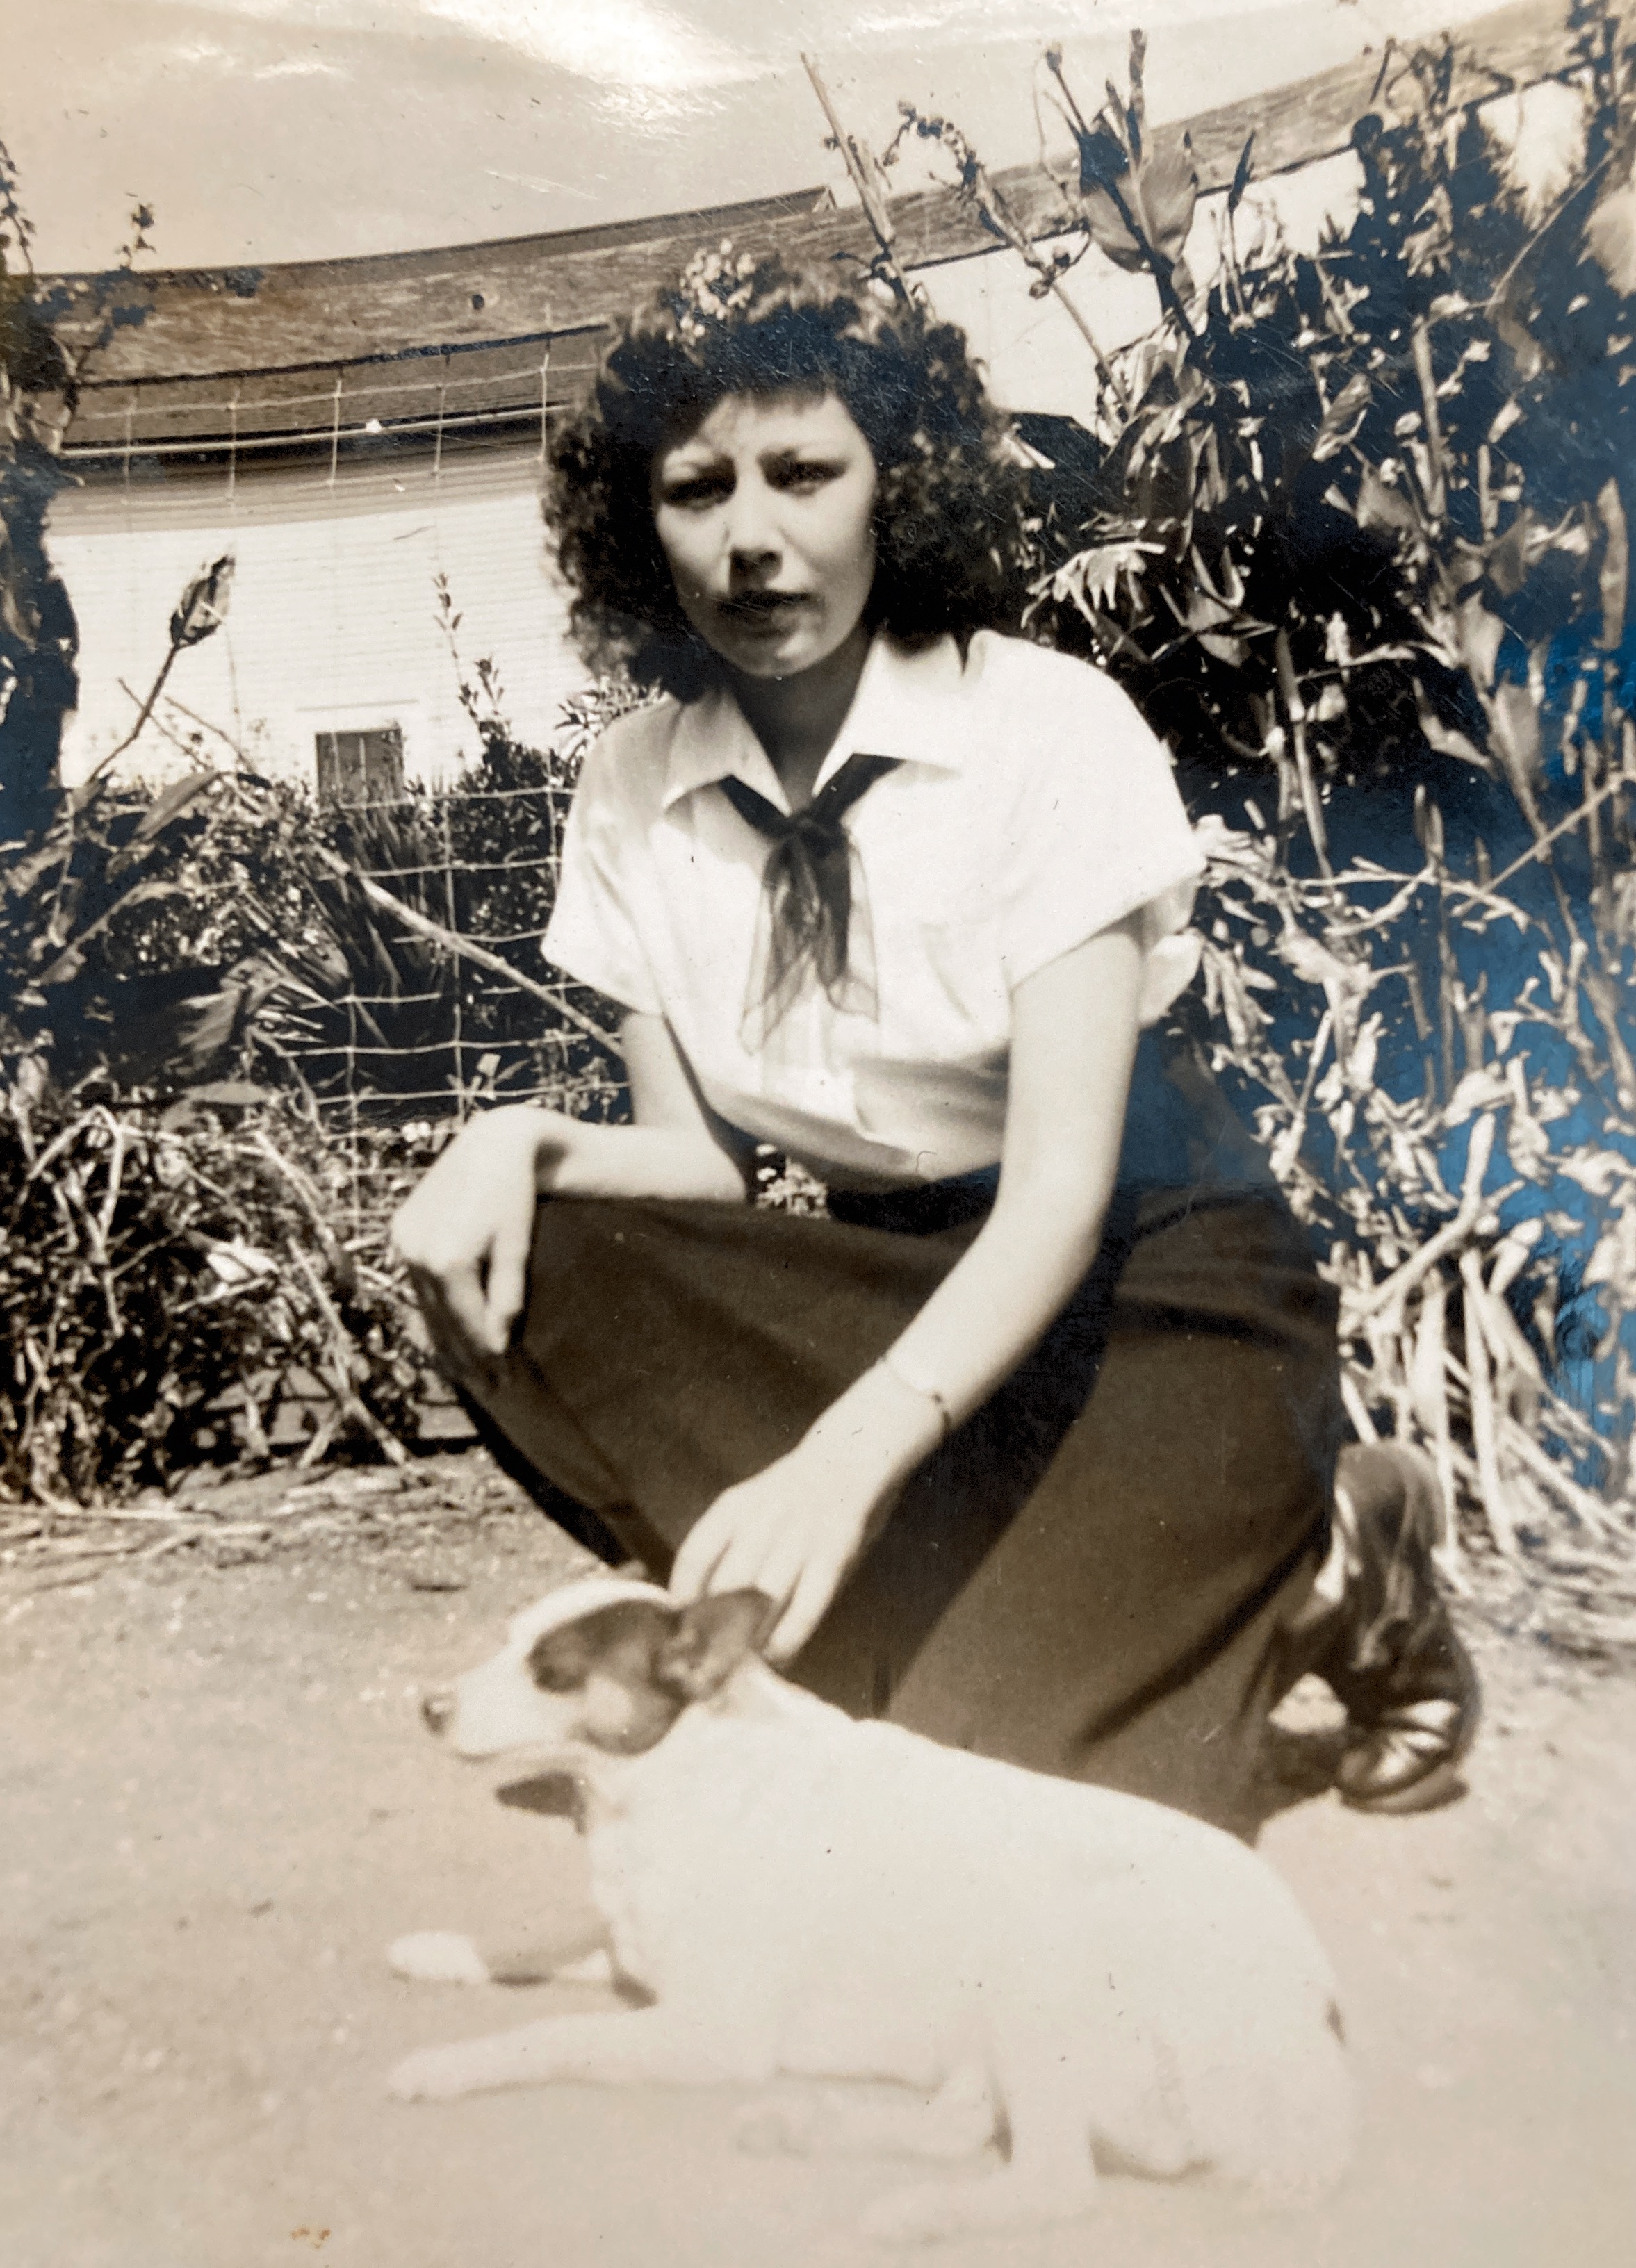 Mom and her dog Boots, about 1940.